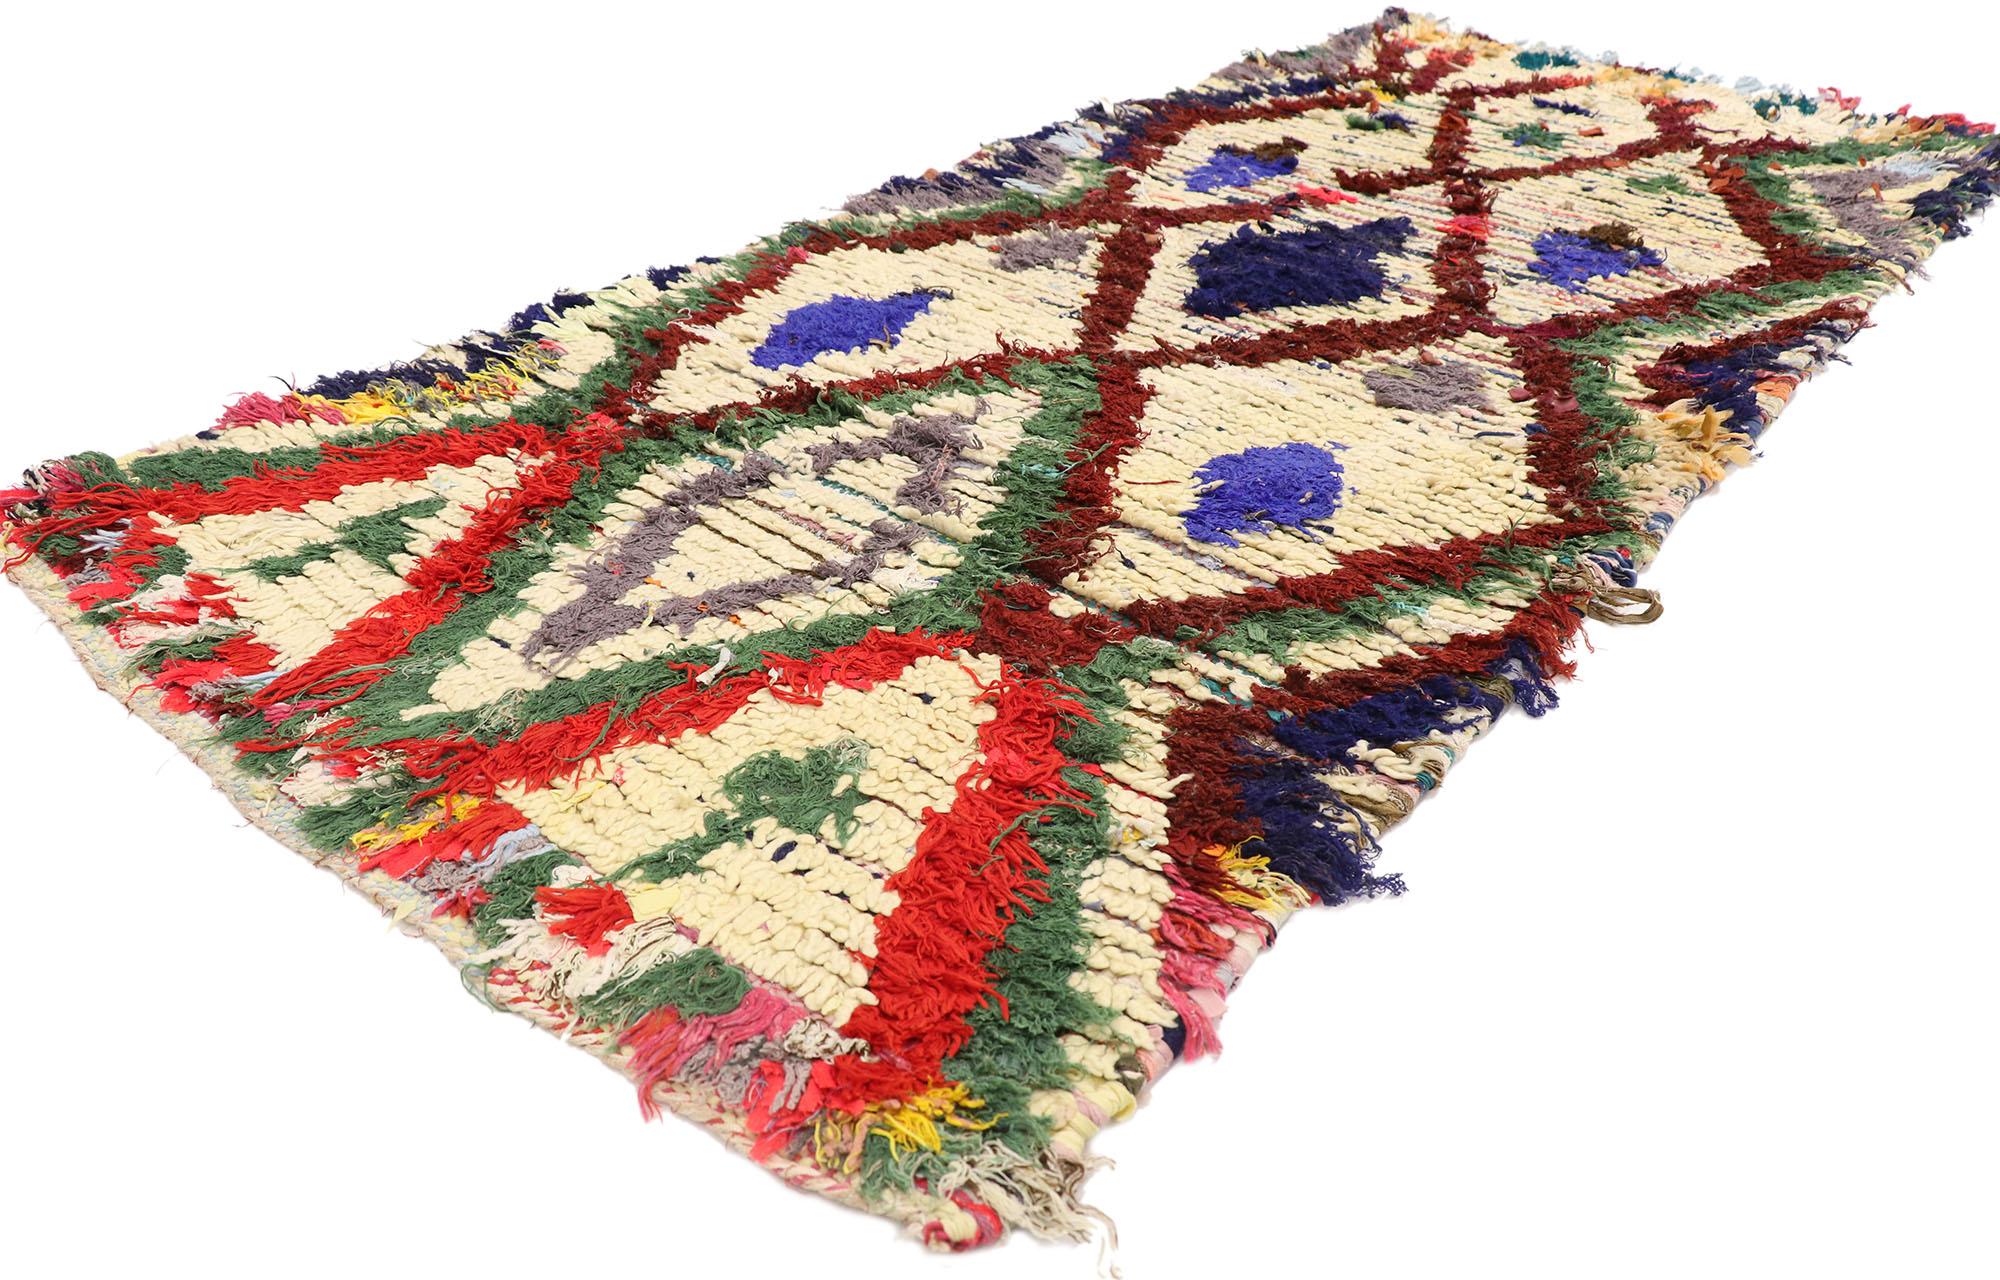 21591 Vintage Berber Boucherouite Moroccan rug with Bohemian Tribal Style 02'10 x 06'05. Showcasing a bold expressive tribal design, incredible detail and texture, this hand knotted cotton and wool vintage Berber Boucherouite Moroccan rug is a